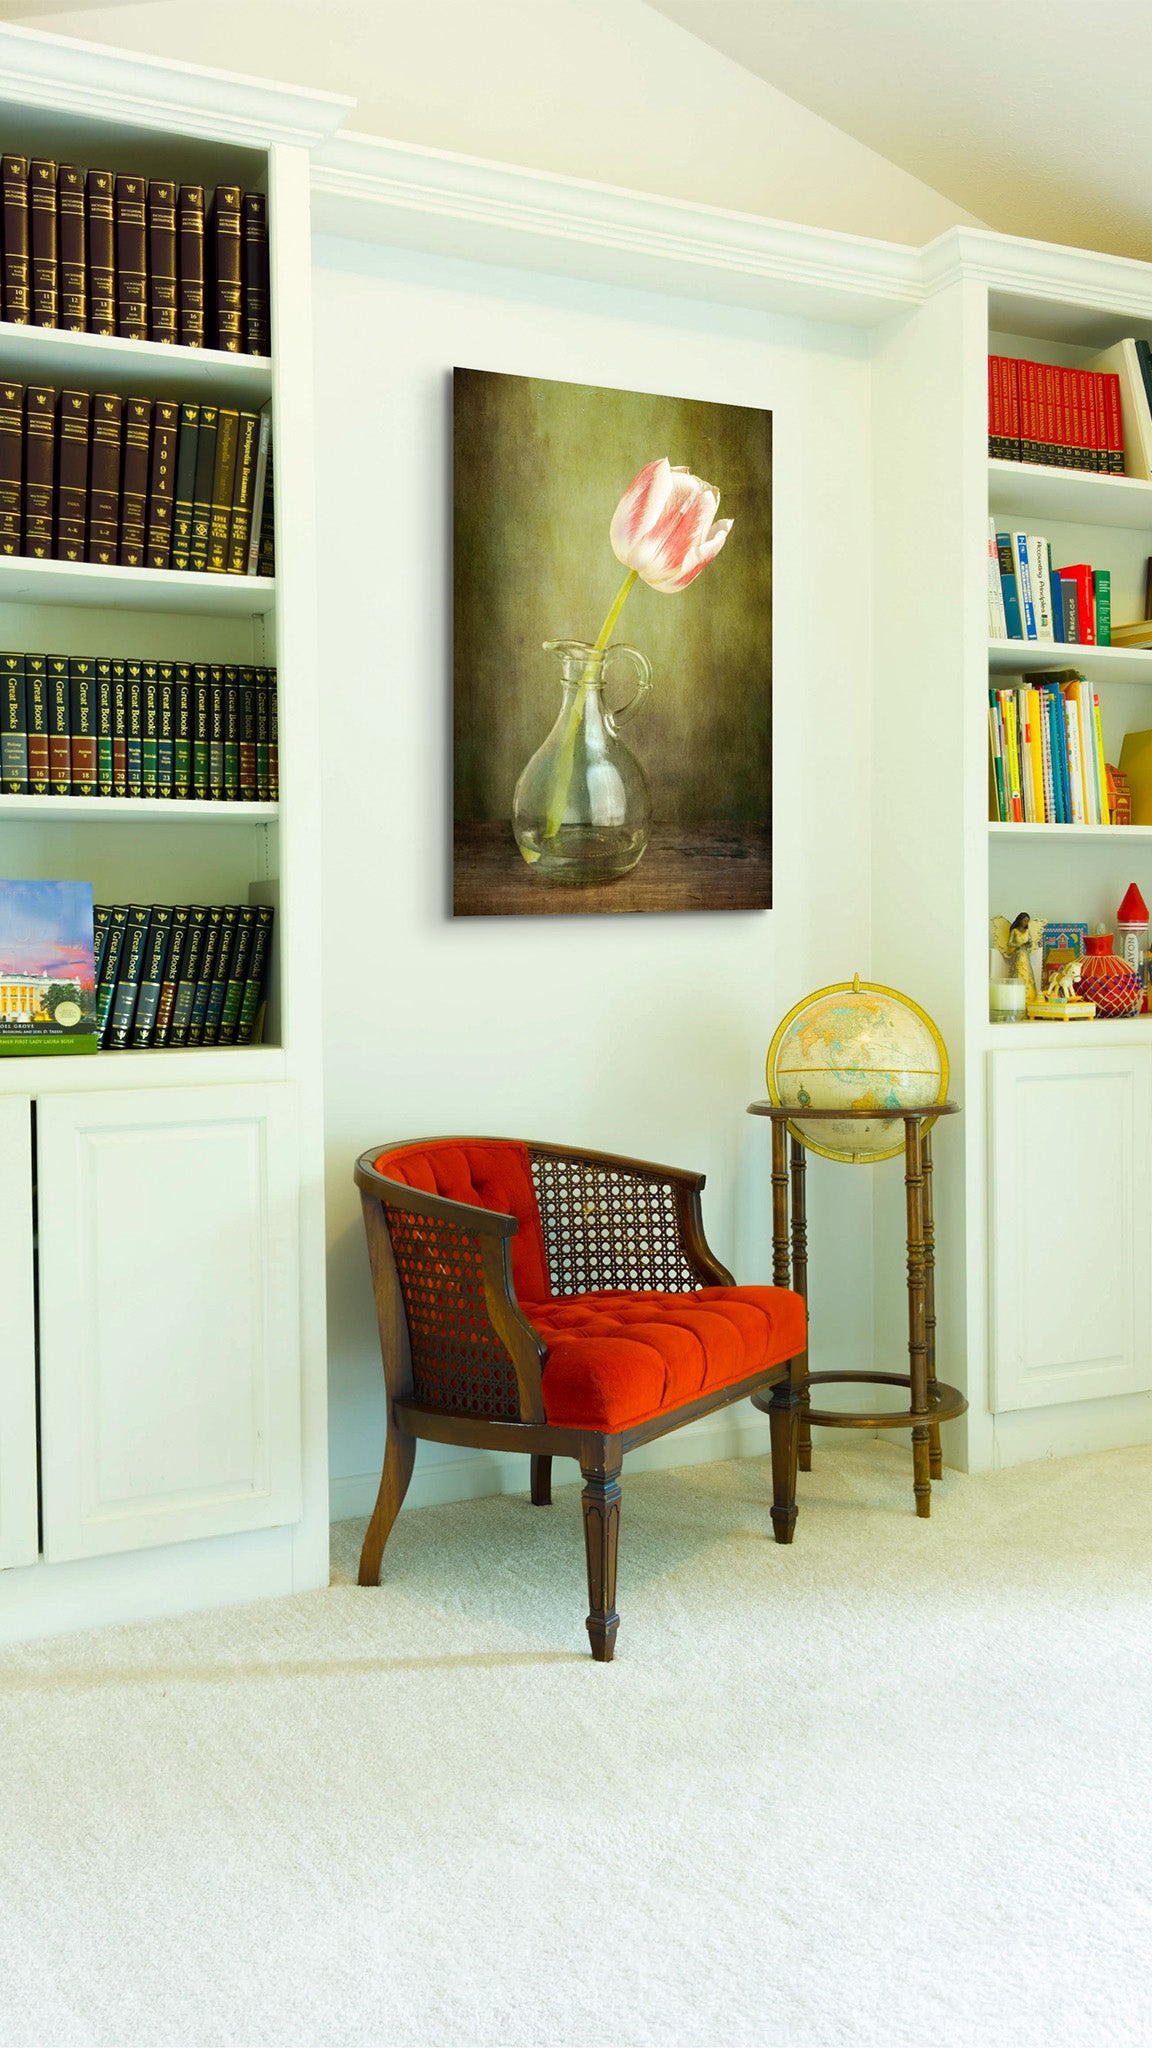 Picture hanging on the wall of a library. The picture is a fine art flower photograph of a tulip in a jar titled "Tulip in Pitcher" by Cameron Dreaux of Dreaux Fine Art.